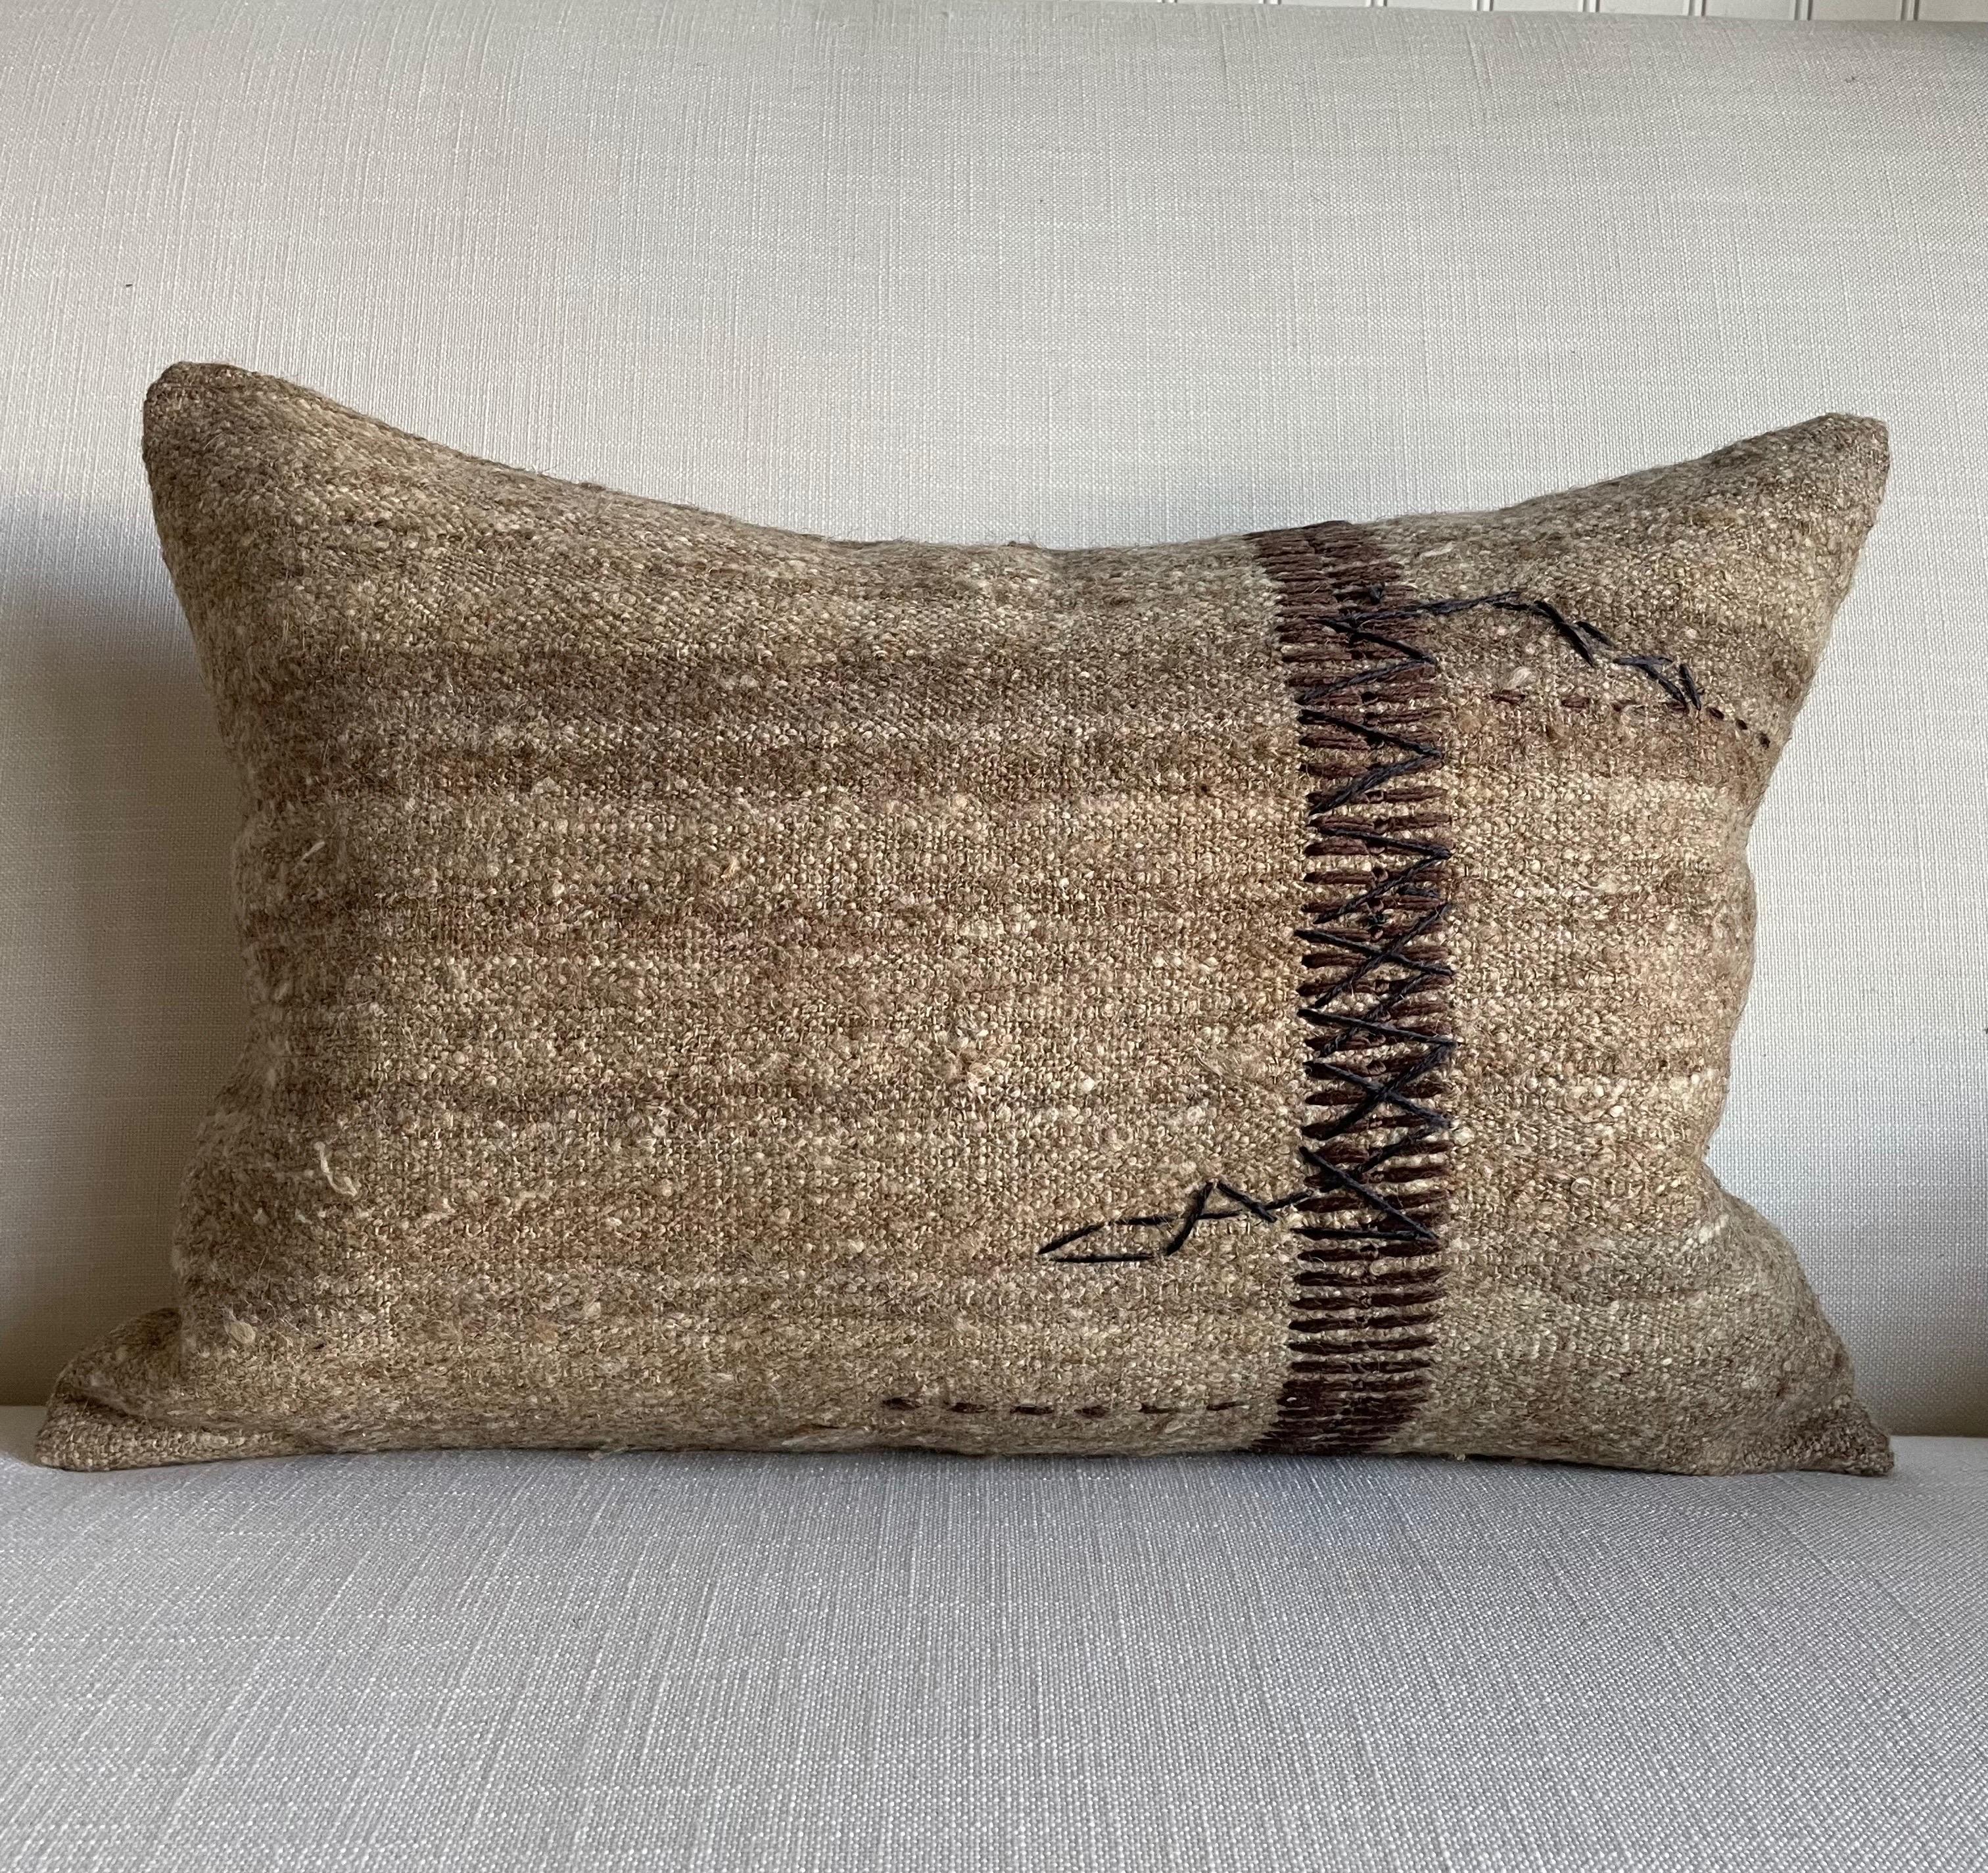 Zia Lumbar Pillow
Beautiful neutral warm brown tones, woven with a thick soft nubby texture.
Size: 16” x 24”
Backing: Linen with hidden zipper closure.
Down/Feather Insert included.